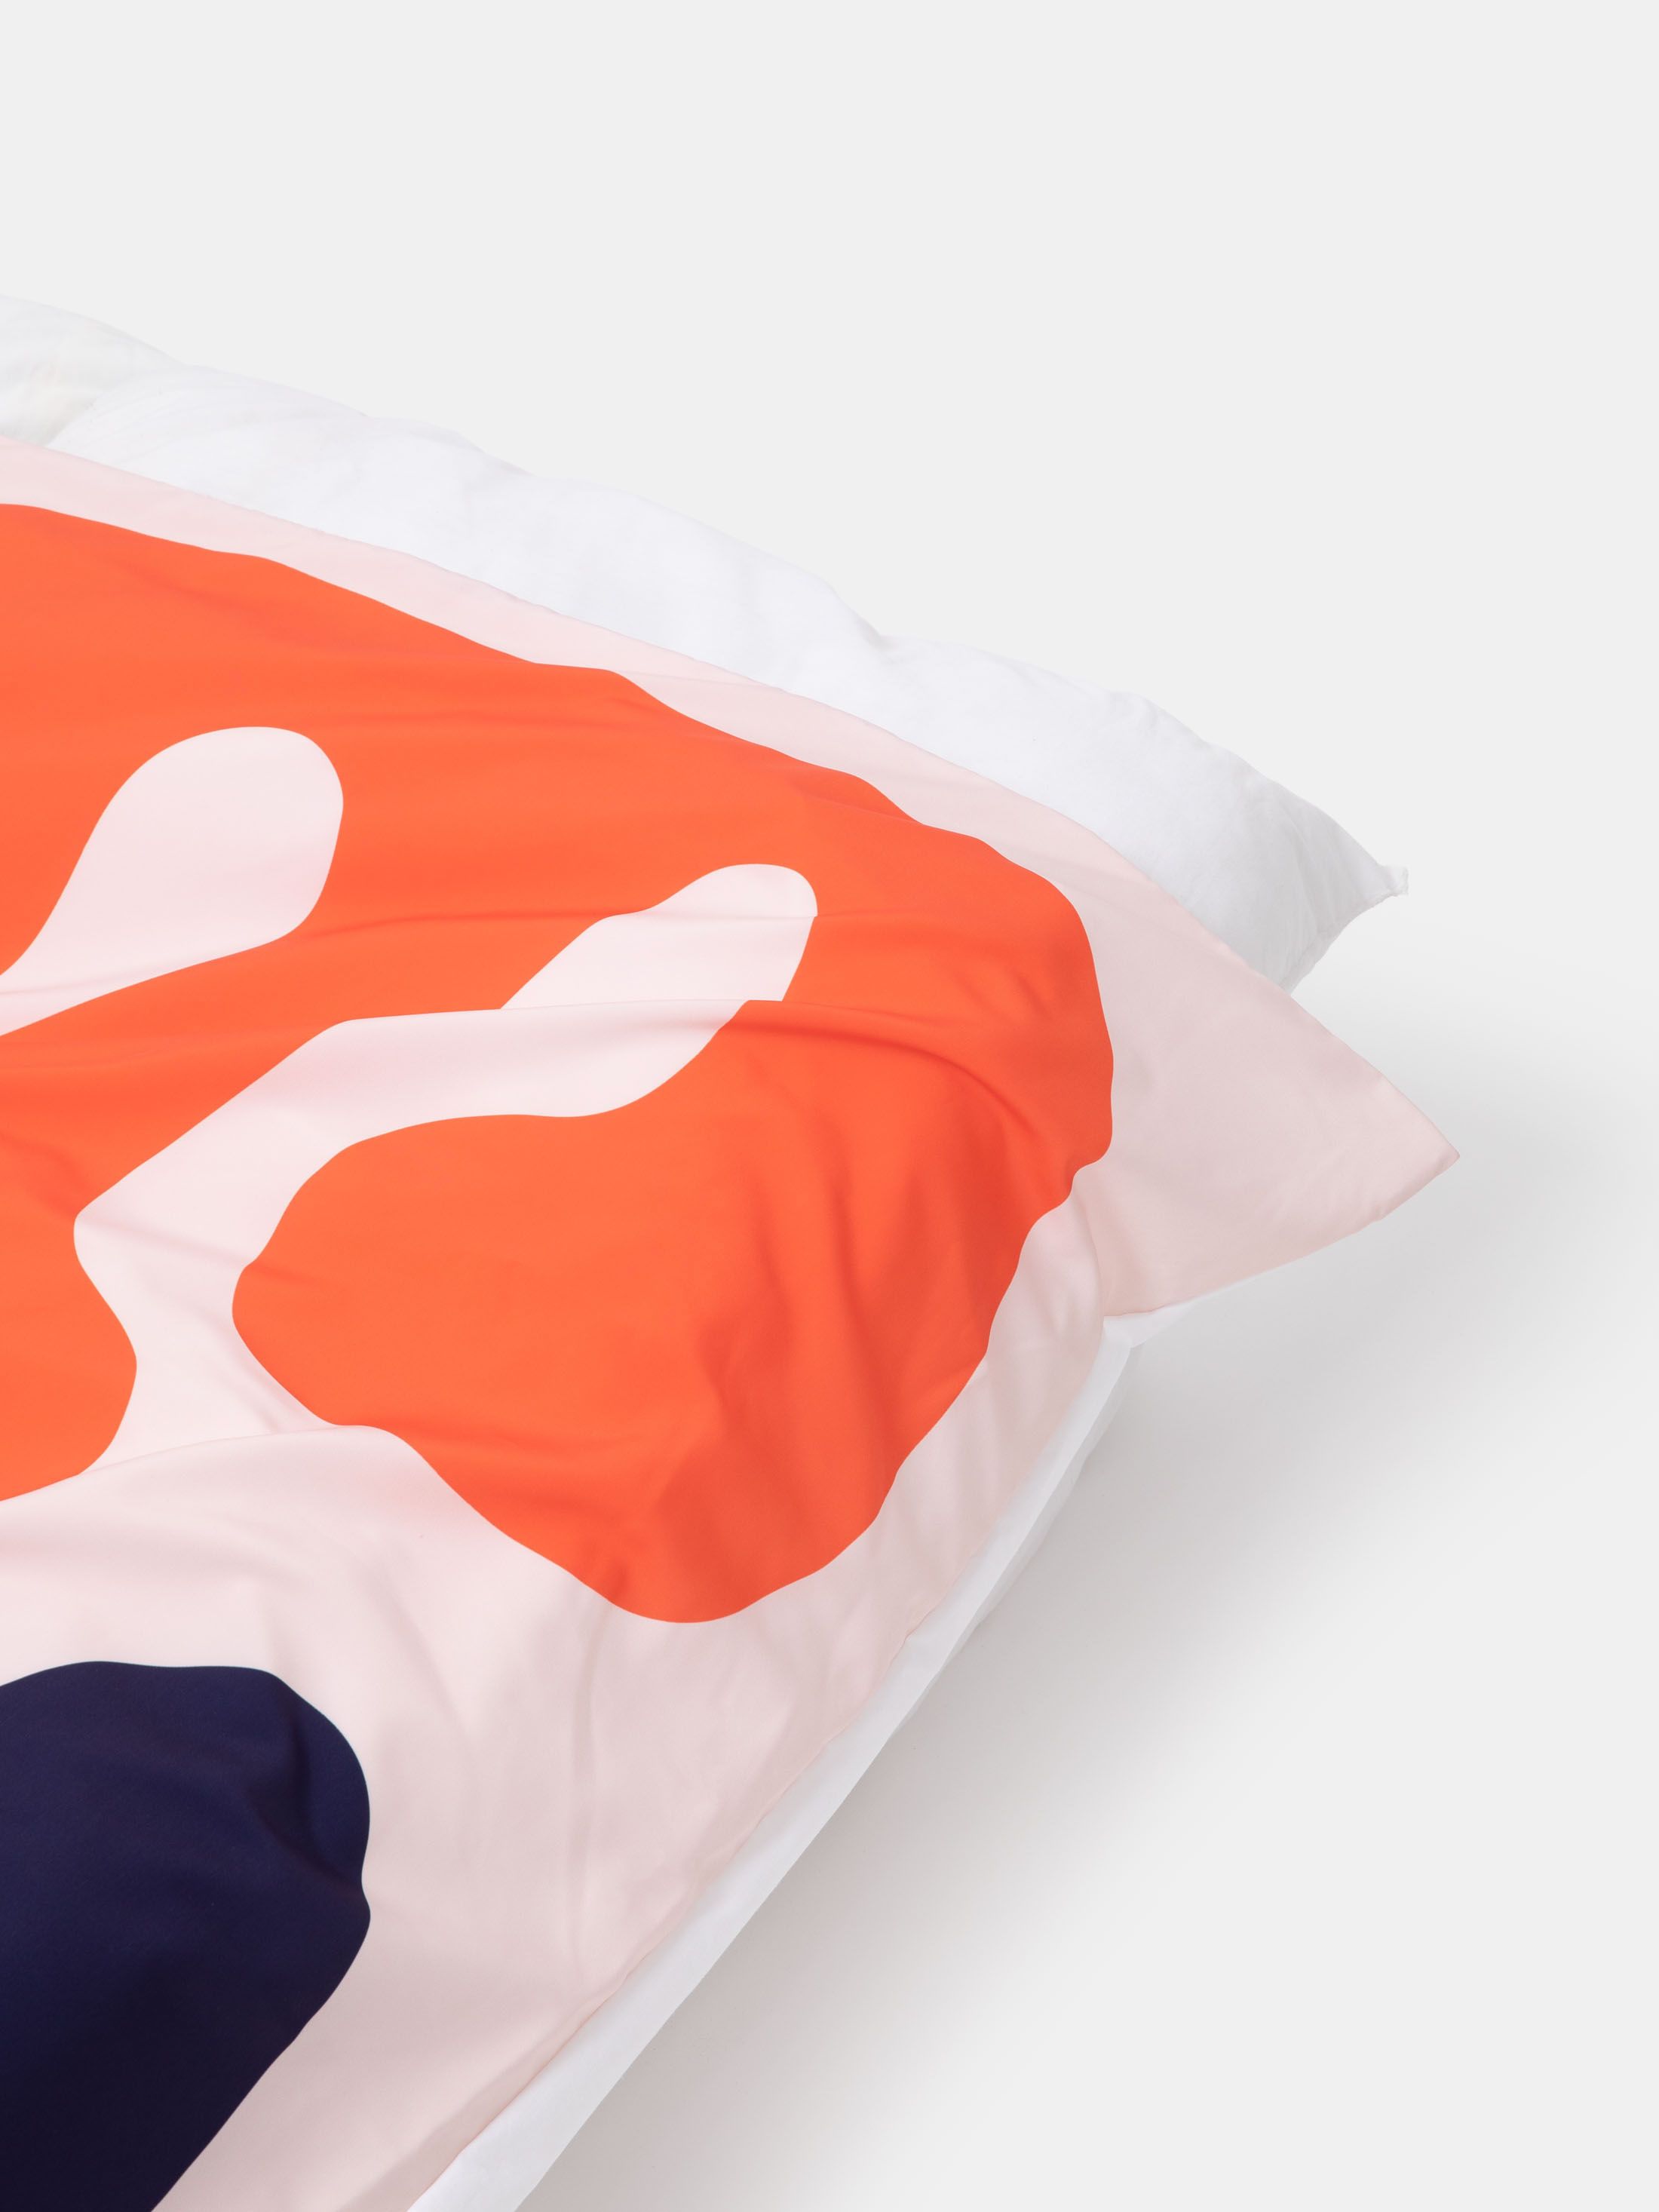 Custom duvet covers printed with your designs on one or both sides